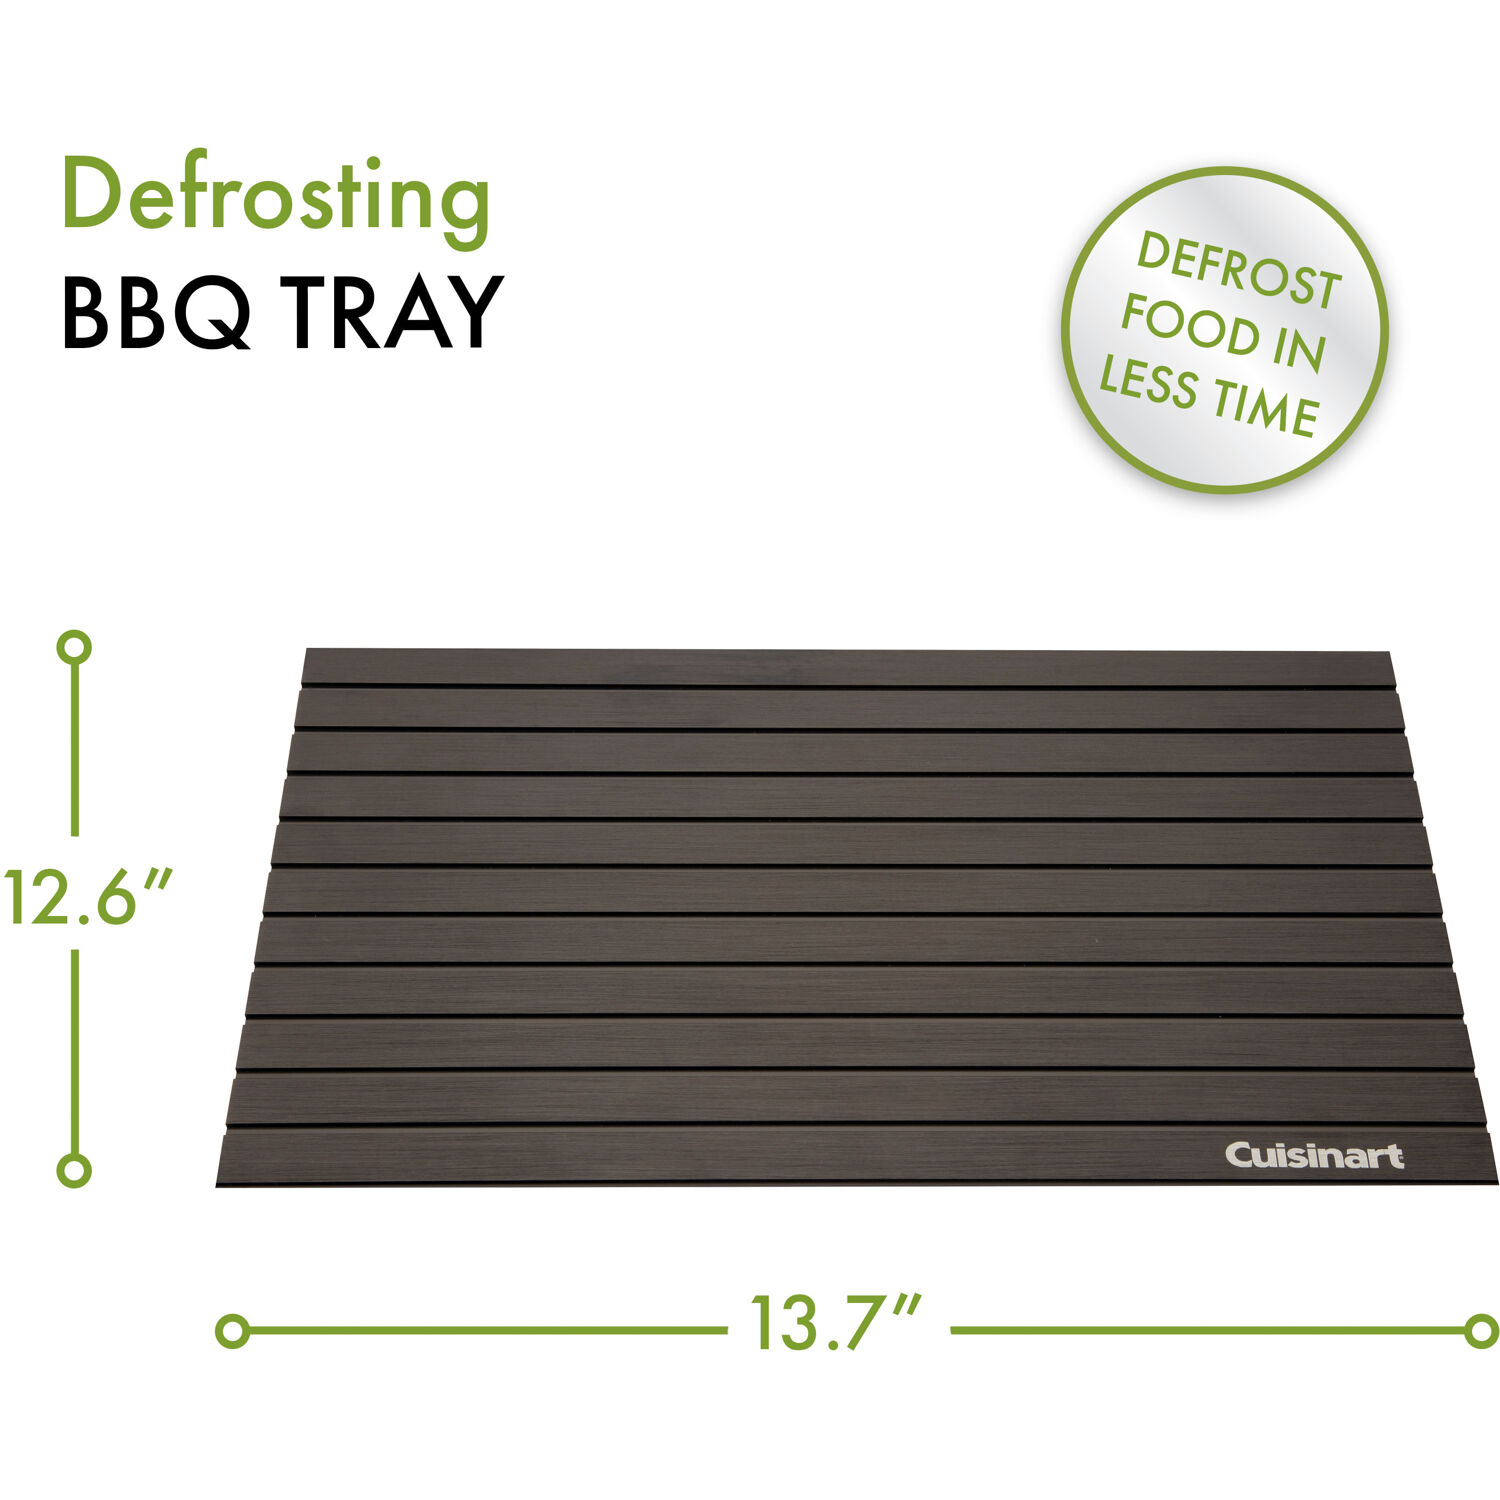 Cuisinart BBQ Defrosting Tray - image 3 of 9